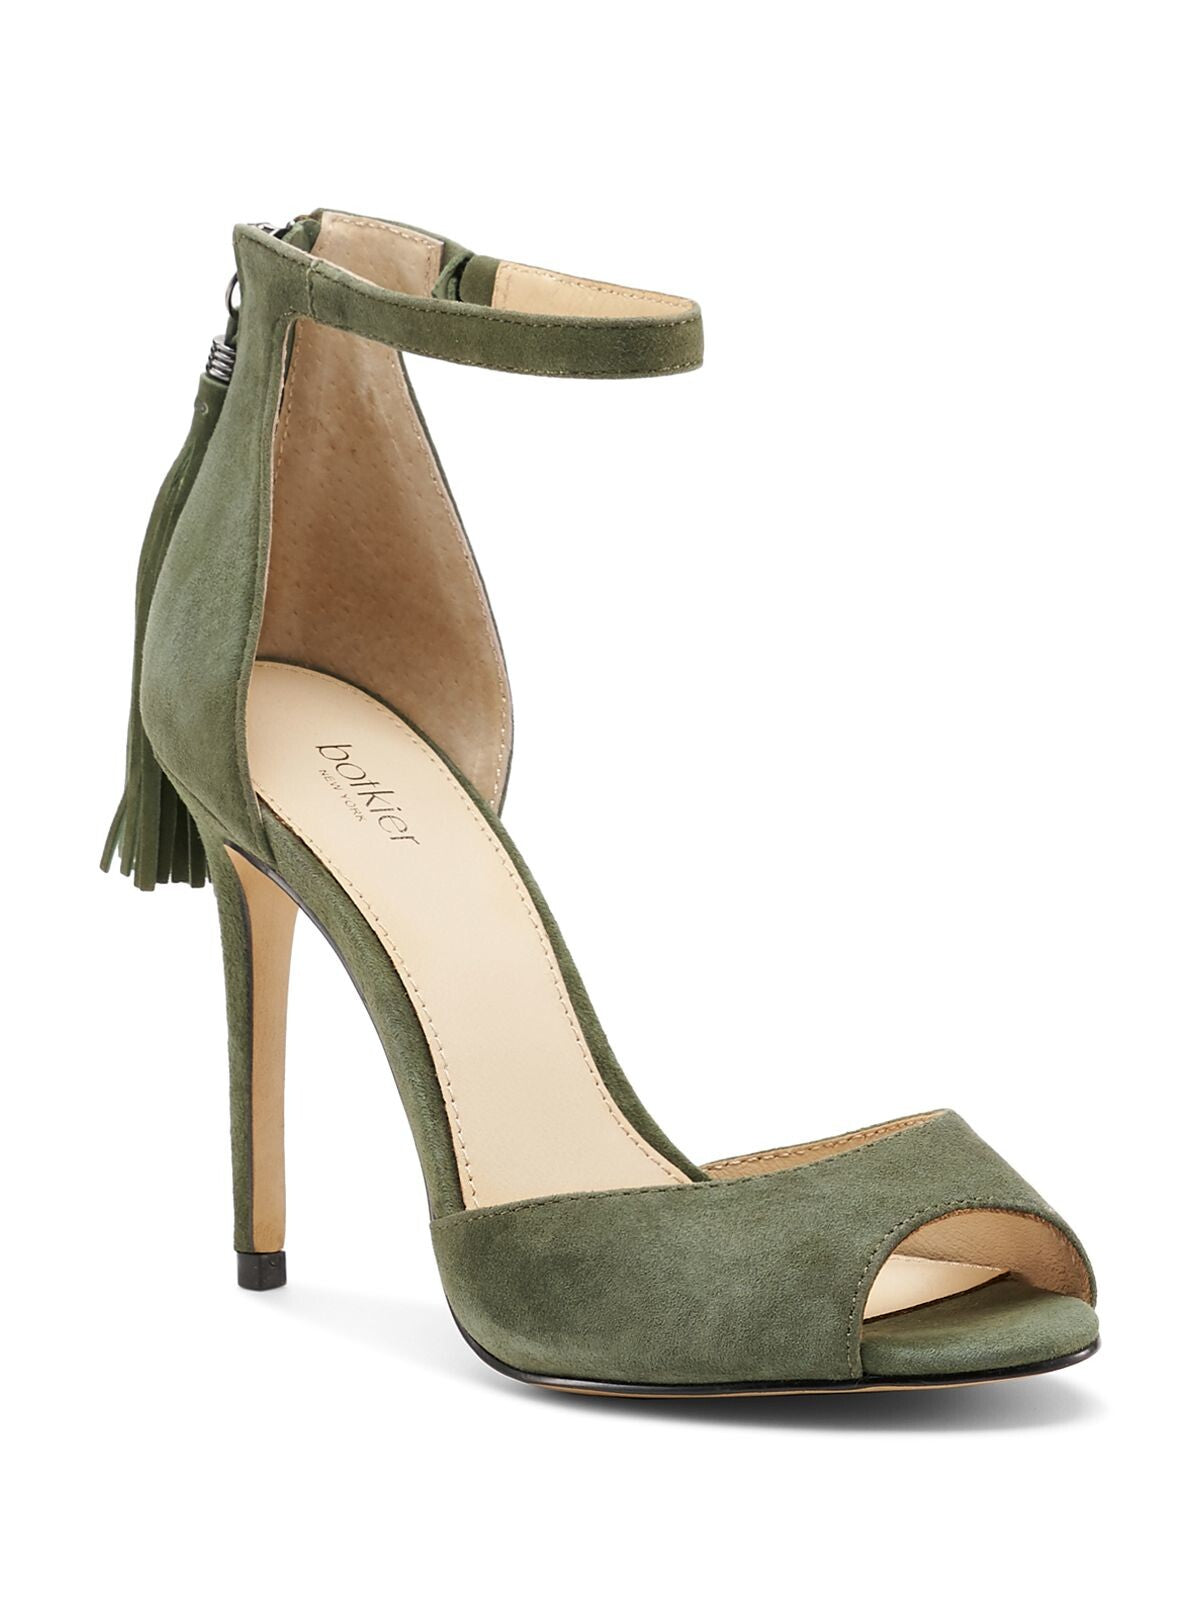 BOTKIER Womens Winter Green Padded Ankle Strap Tasseled Anna Open Toe Stiletto Zip-Up Leather Dress Sandals Shoes 8.5 M